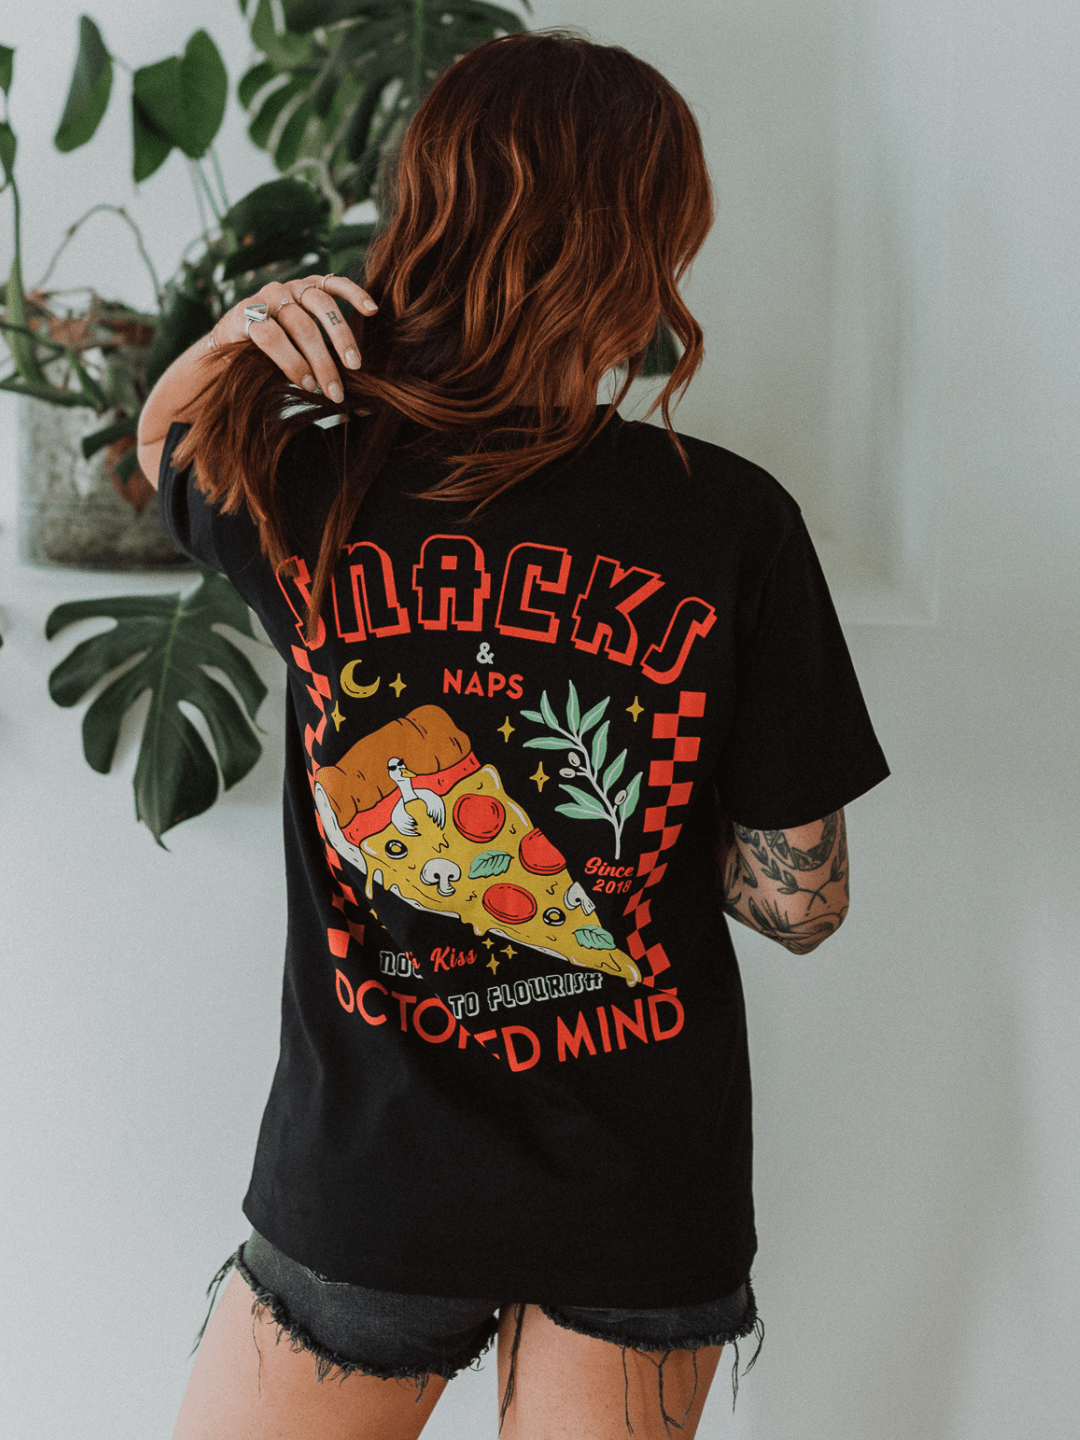 Snacks and Naps T-Shirt - Octopied Mind